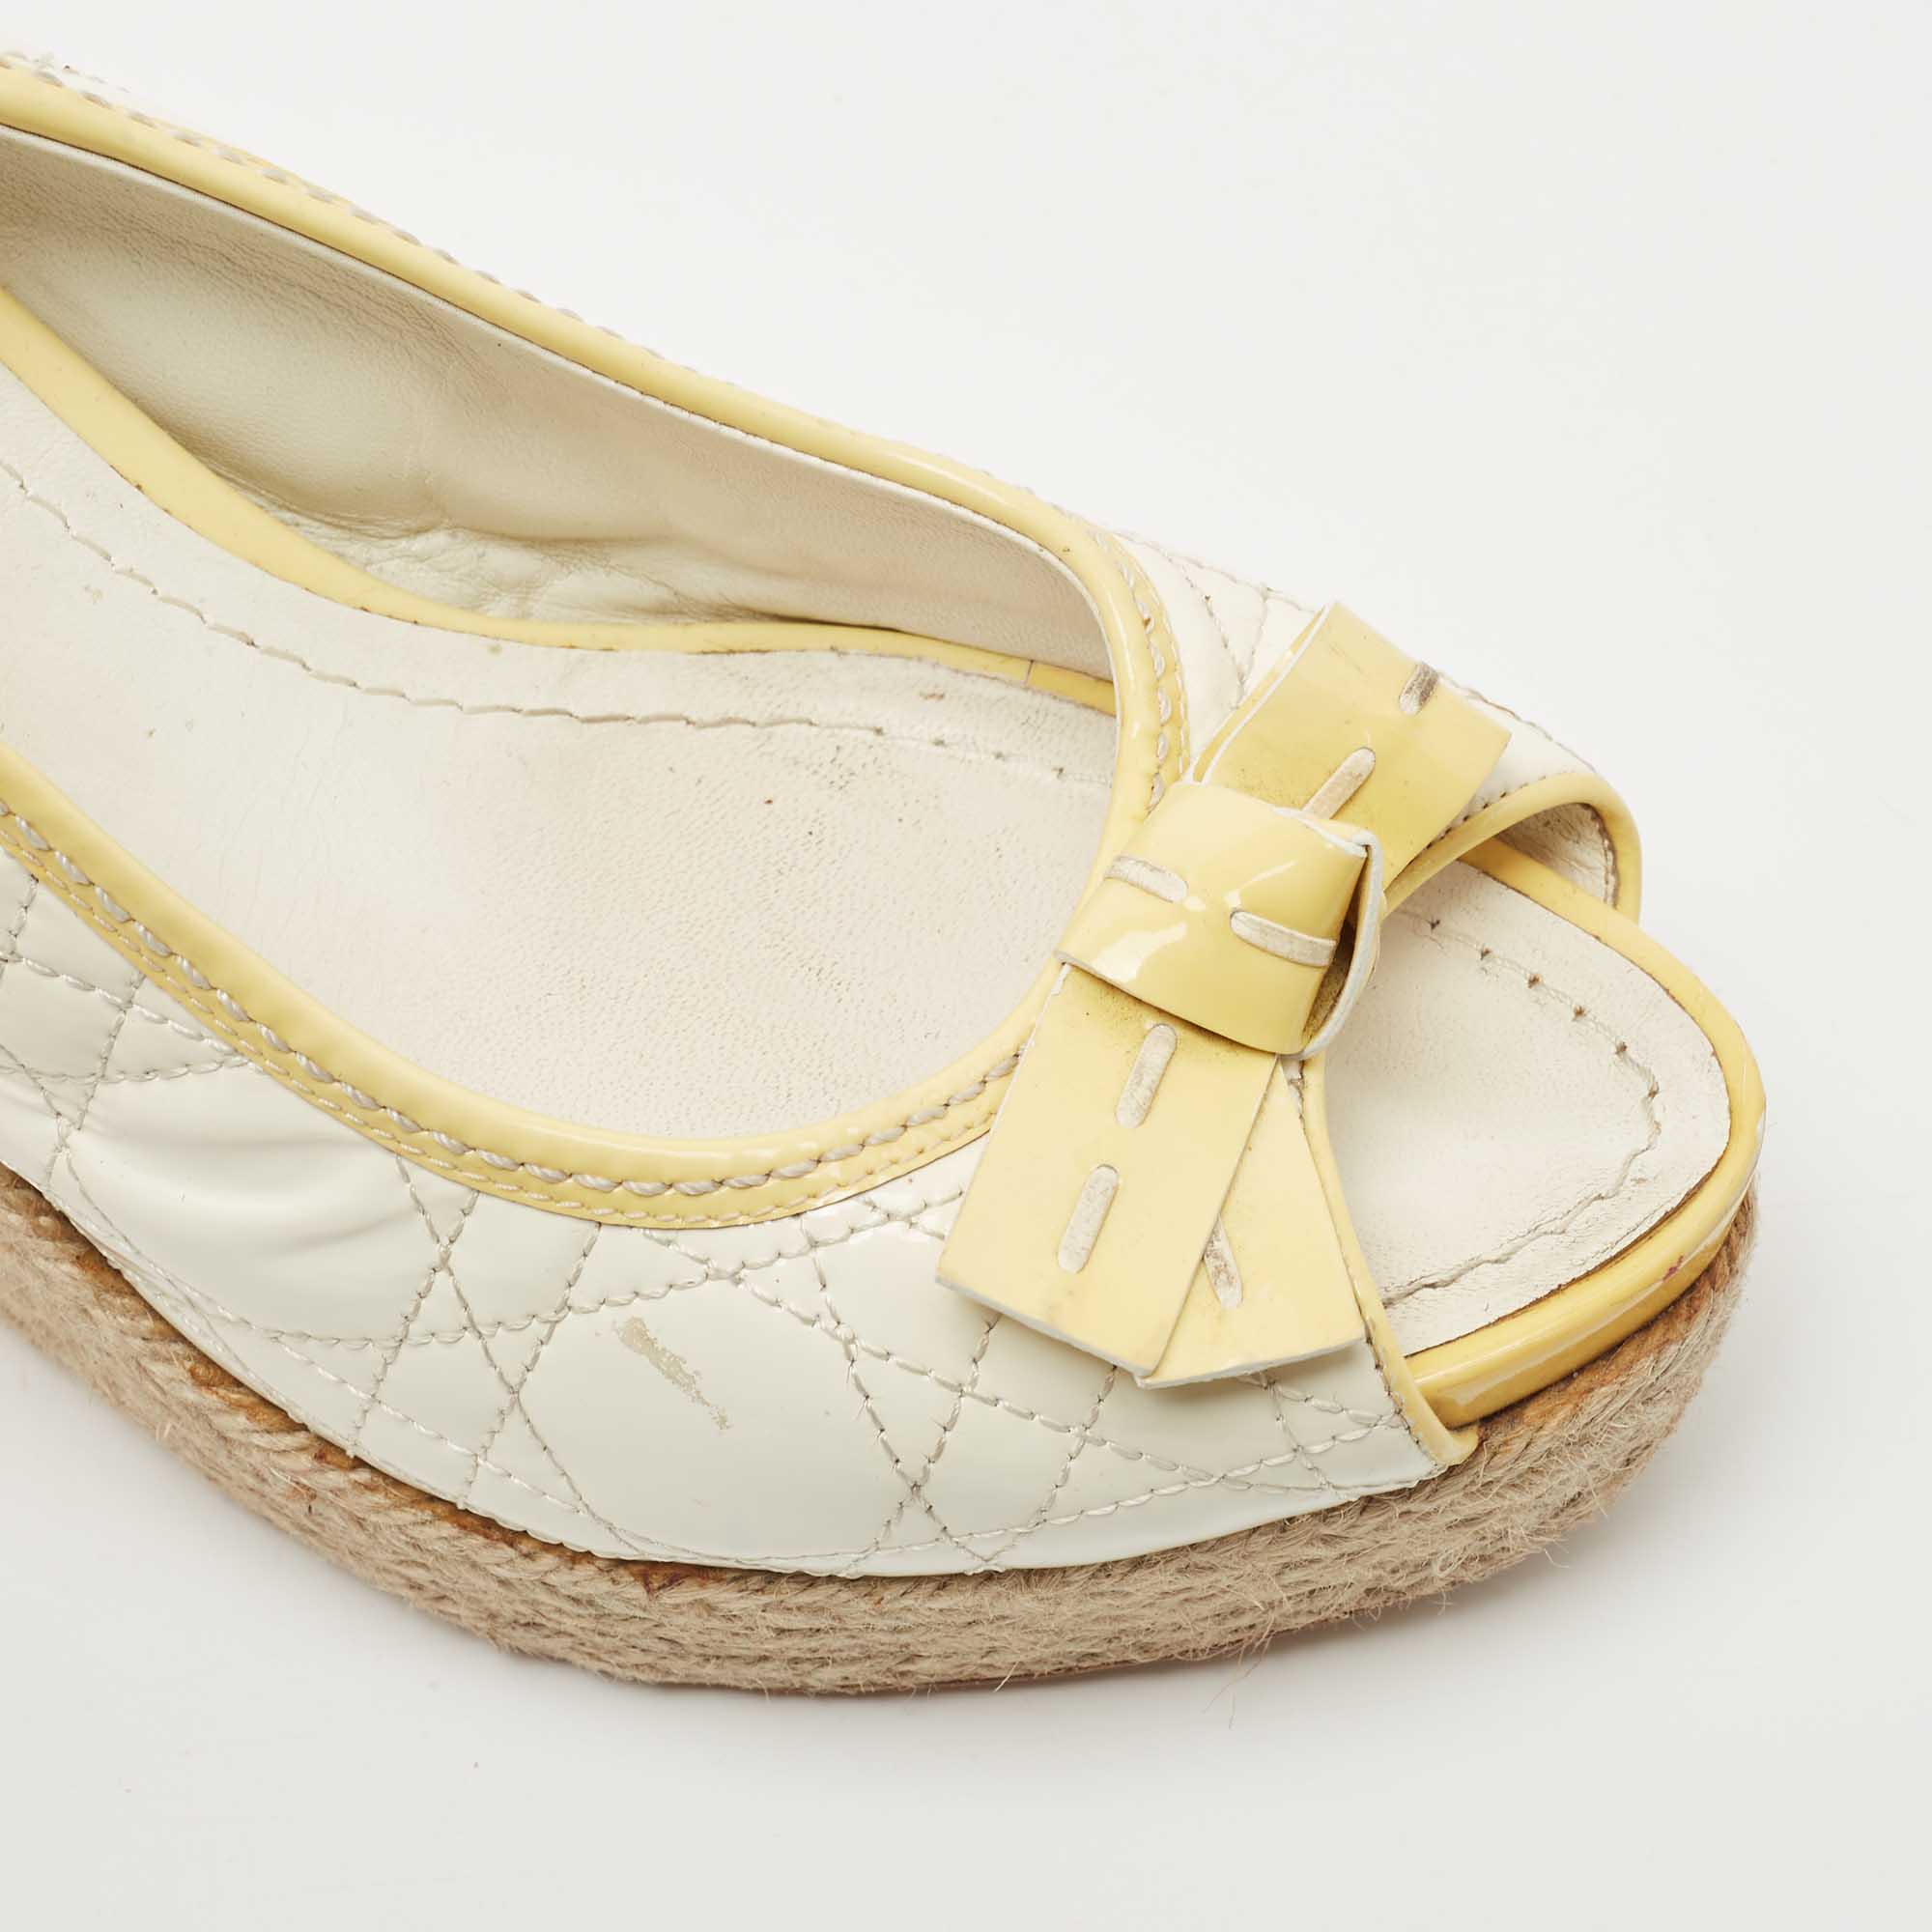 Dior White/Yellow Cannage Patent Leather Espadrille Wedge Slingback Sandals Size 41